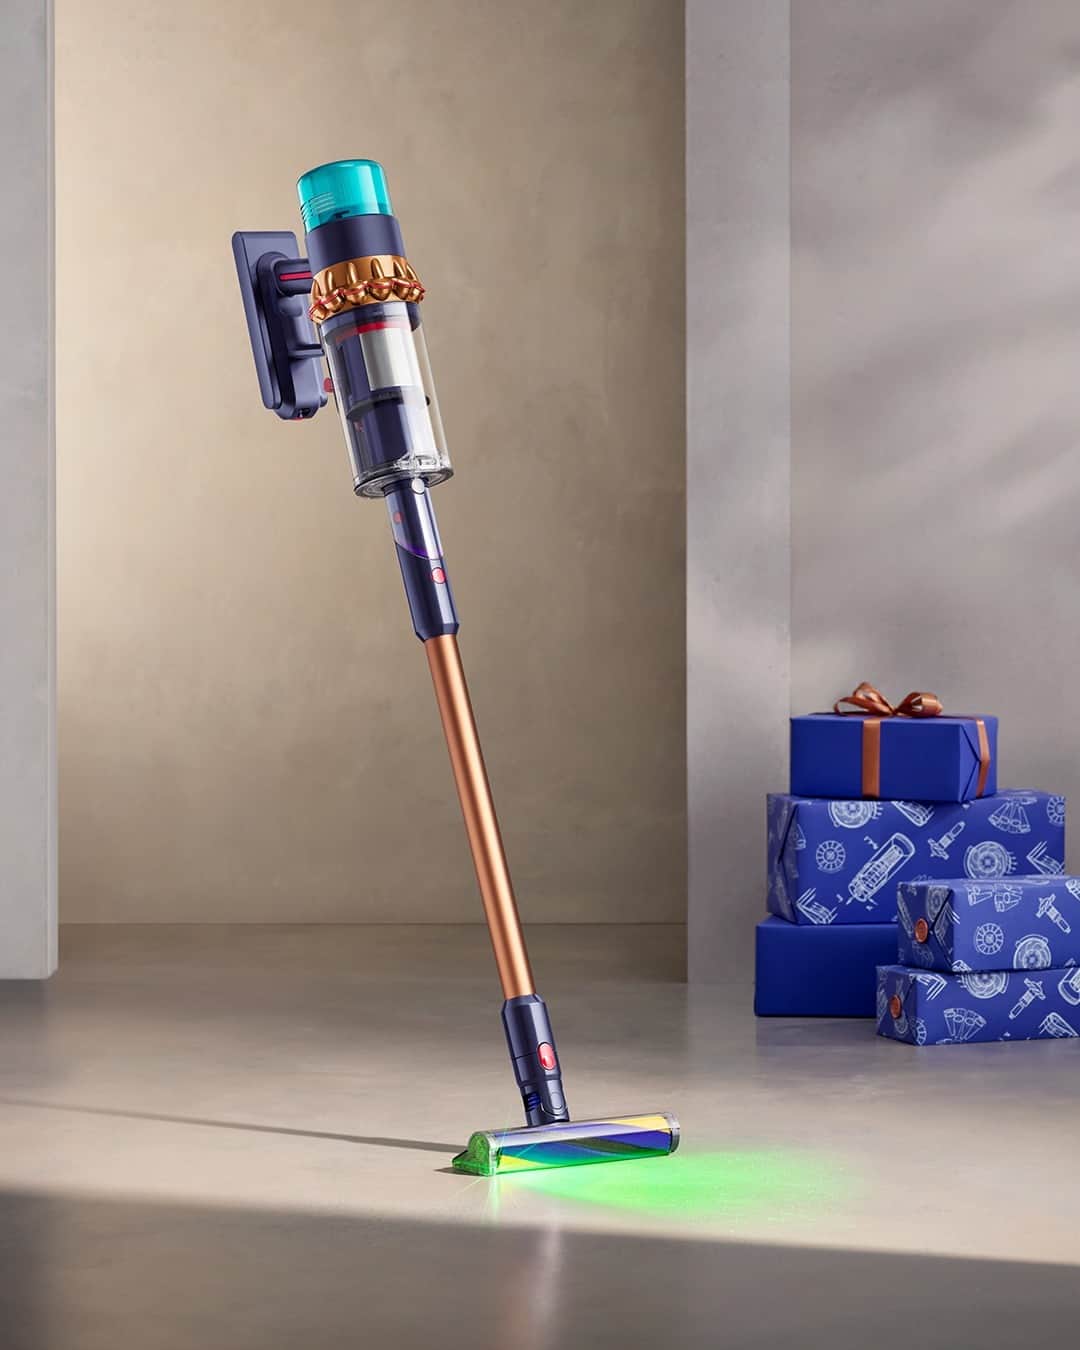 Dysonのインスタグラム：「Give the Dyson Gen5detect™ vacuum in Prussian blue and rich copper. 🎁   With advanced suction power and HEPA filtration, it's our most powerful cordless vacuum.  Exclusive colours available only at Dyson.com.   #Dyson #DysonVacuum #GivetheGiftofInvention #CordlessVacuum #DysonTechnology」